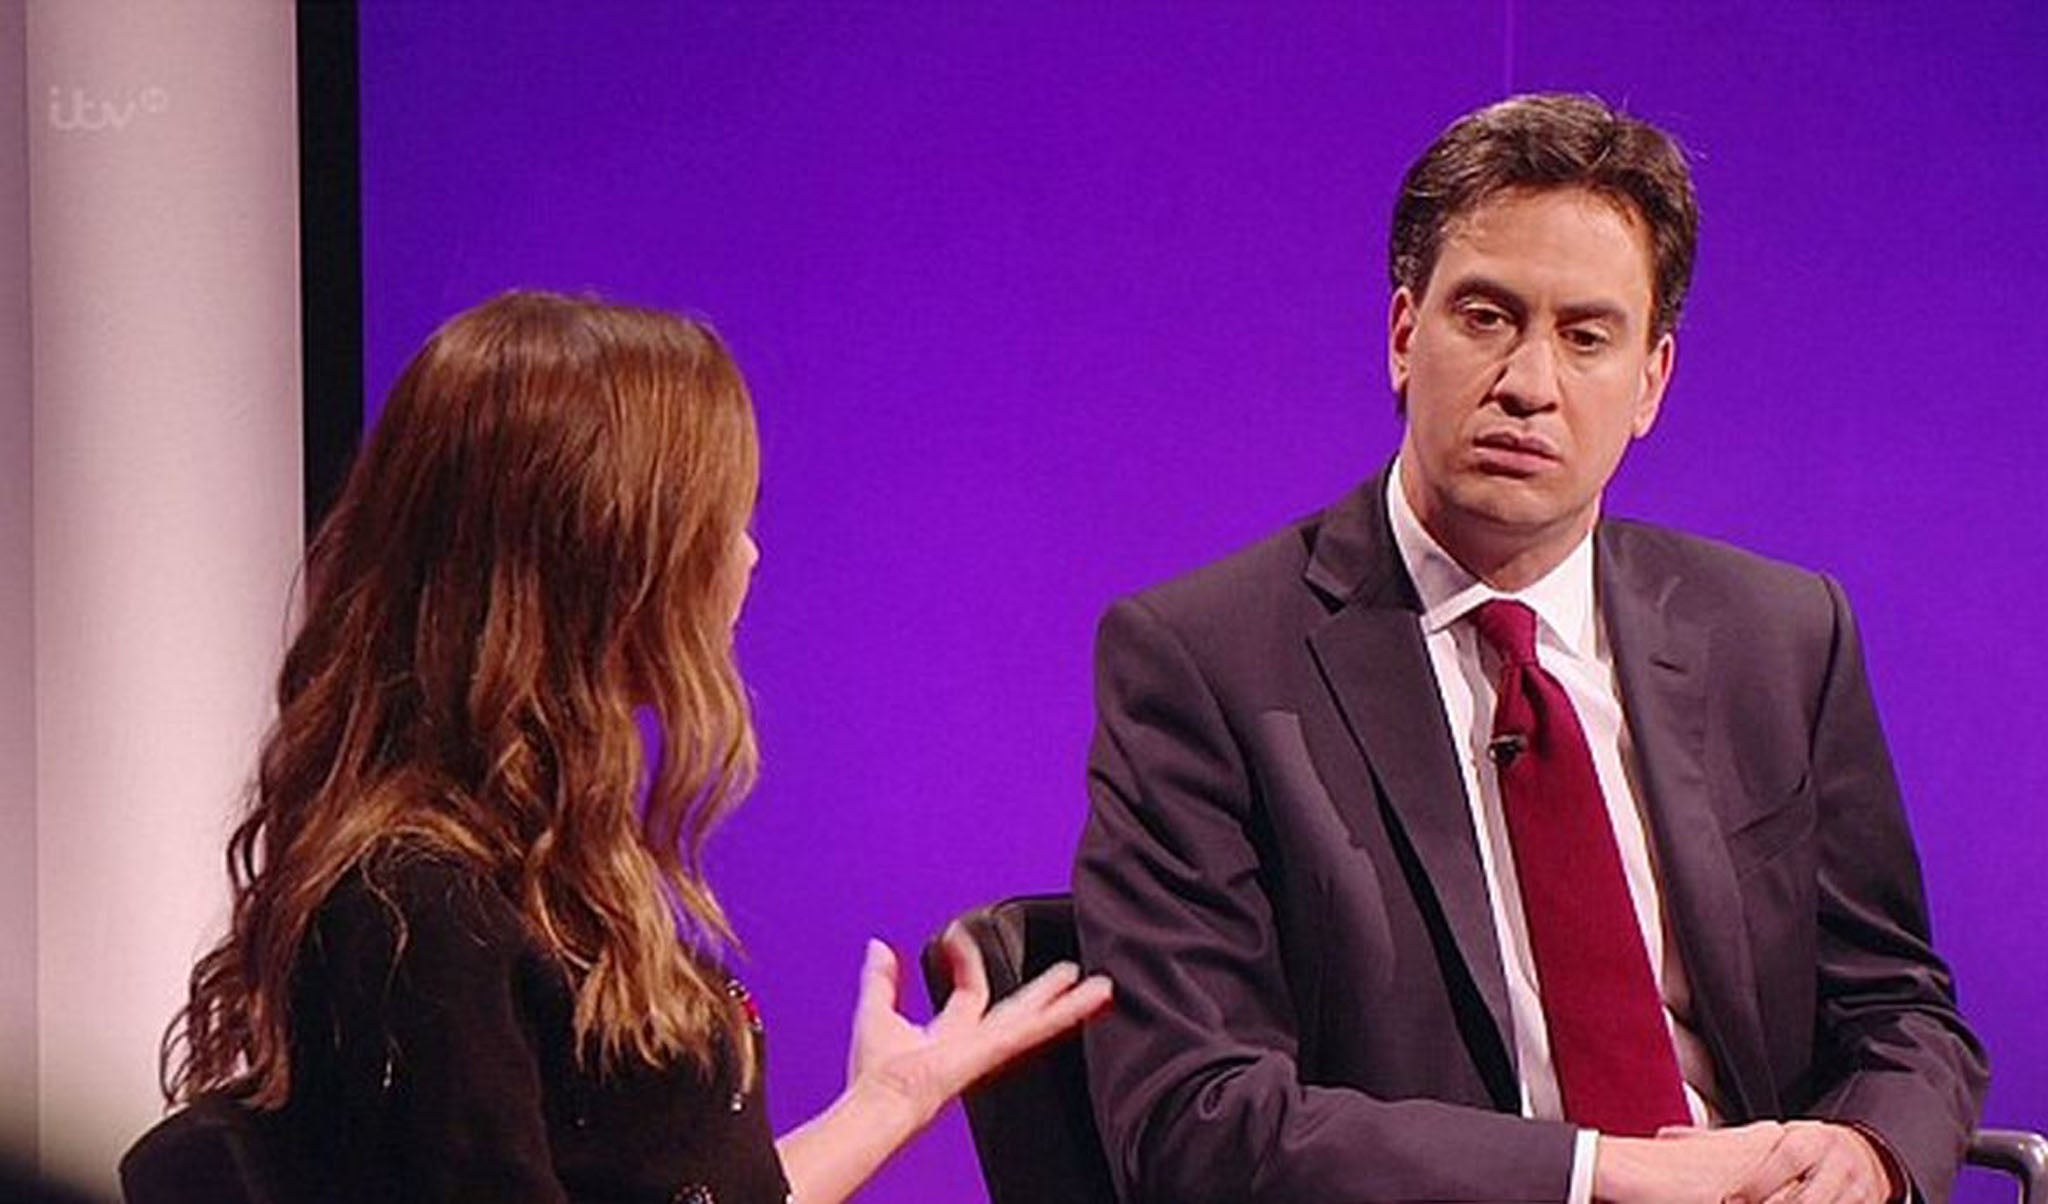 Myleene Klass goes head-to-head with Ed Miliband on The Agenda over mansion tax